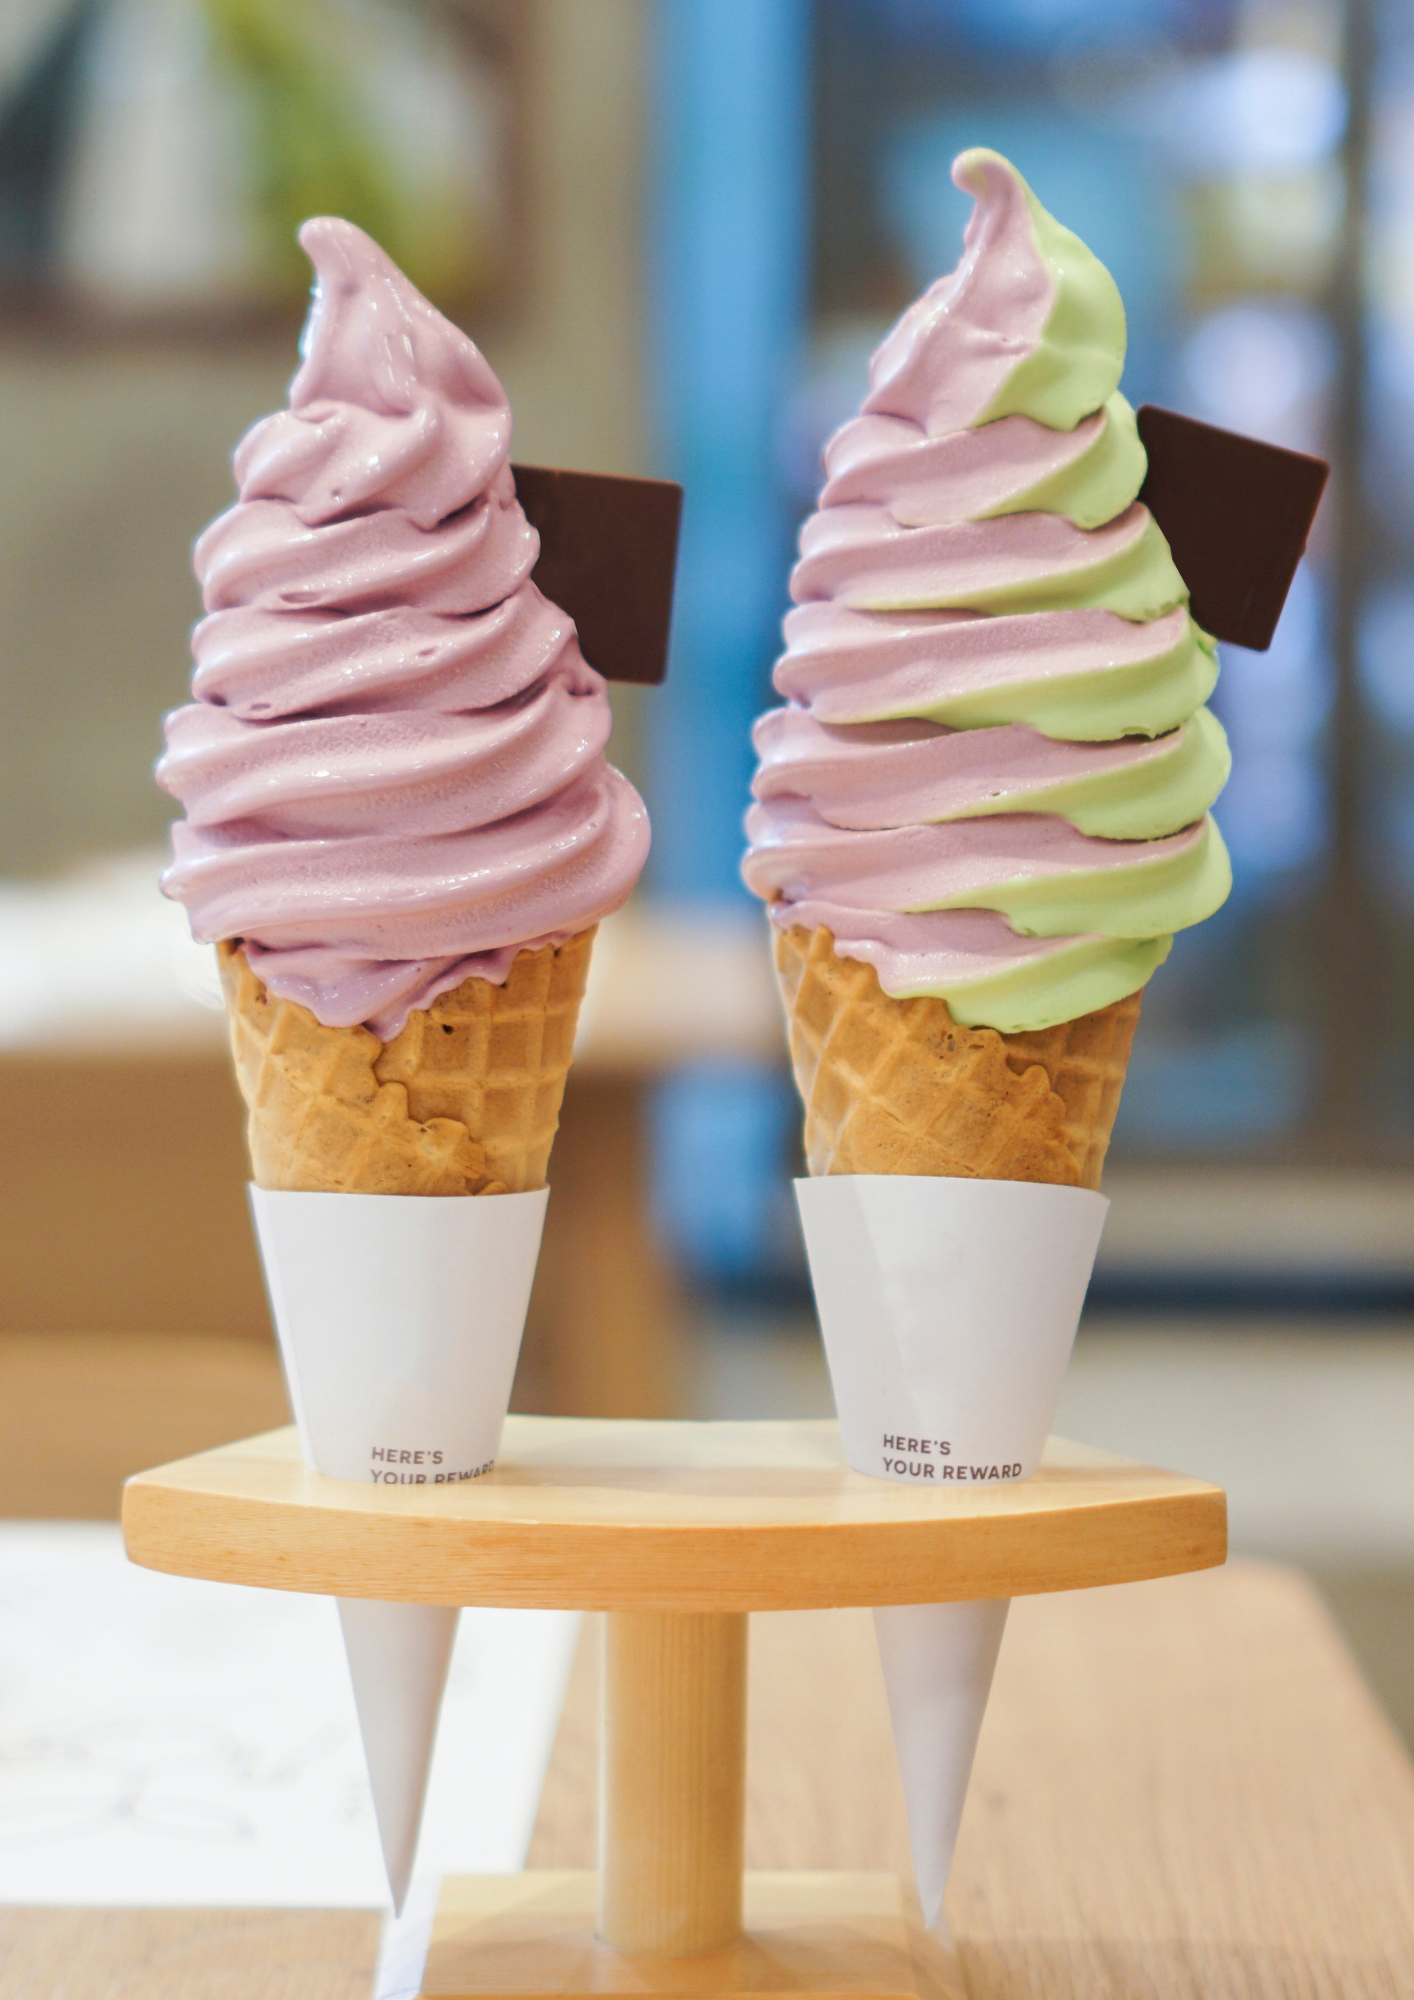 Two soft serve ice creams in waffle cones